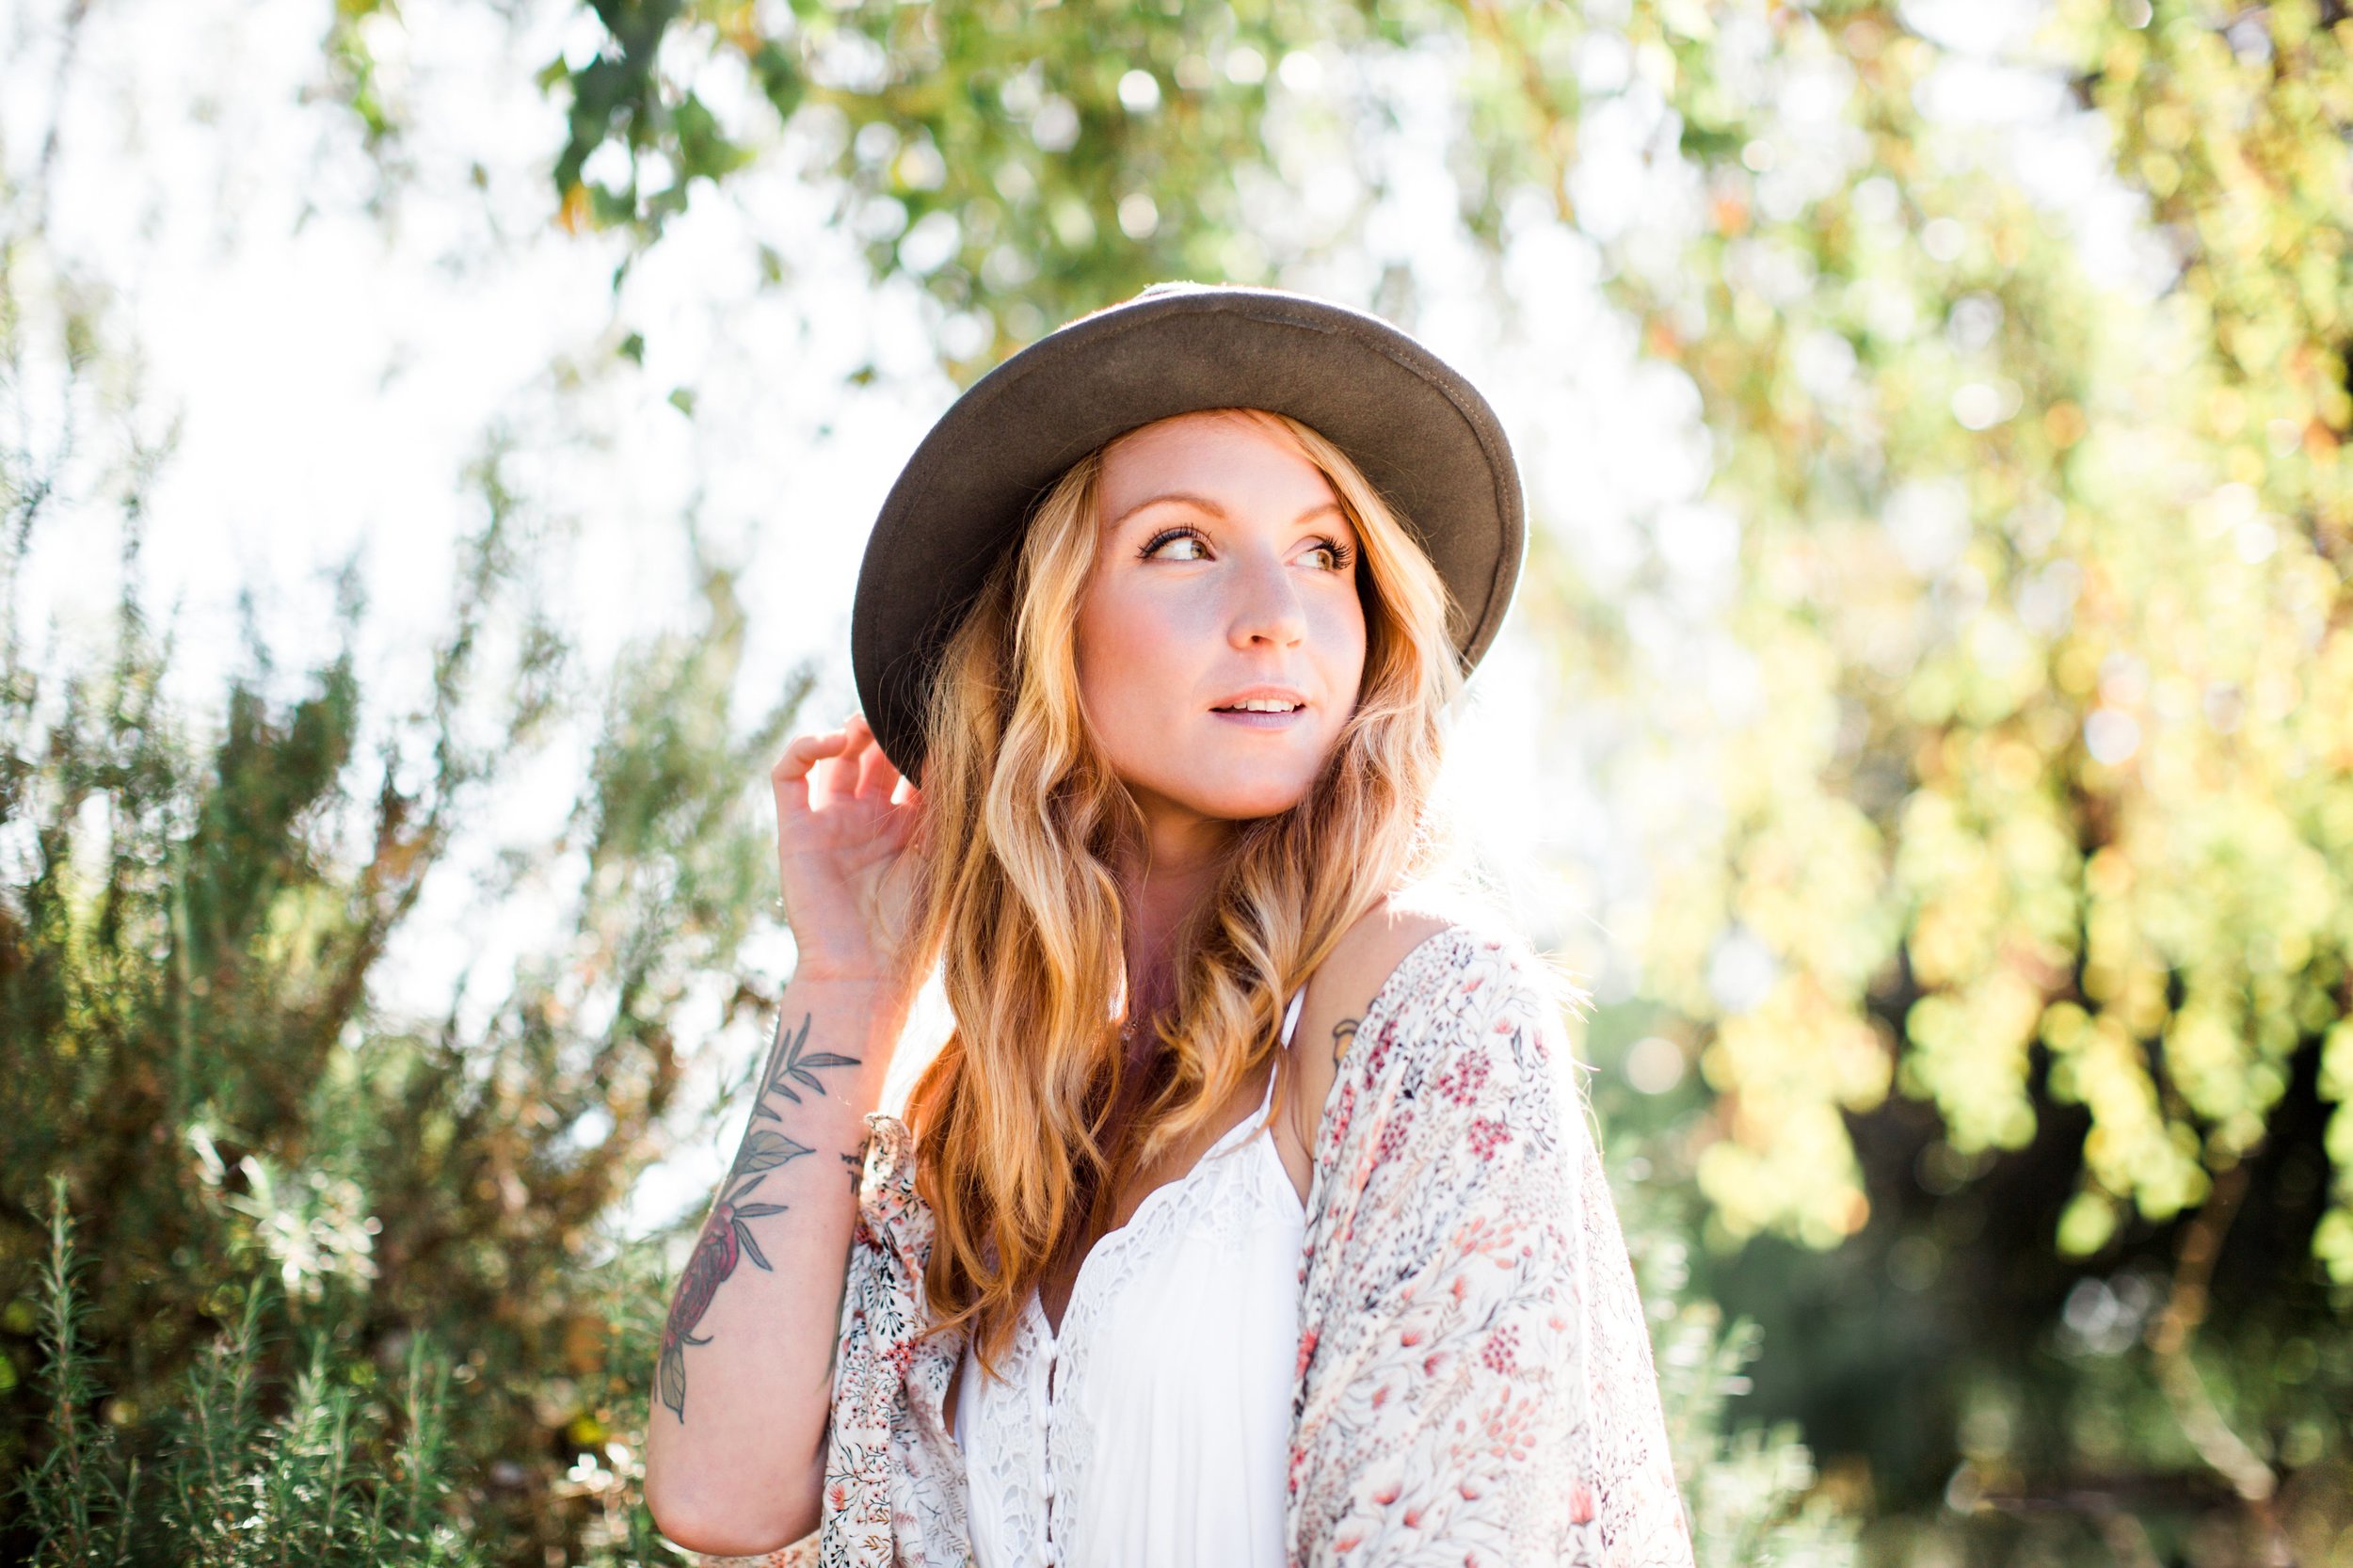 Bright and Boho Outdoor Personal Portrait Photo Session in West Seattle WA by Janelle Elaine.jpg